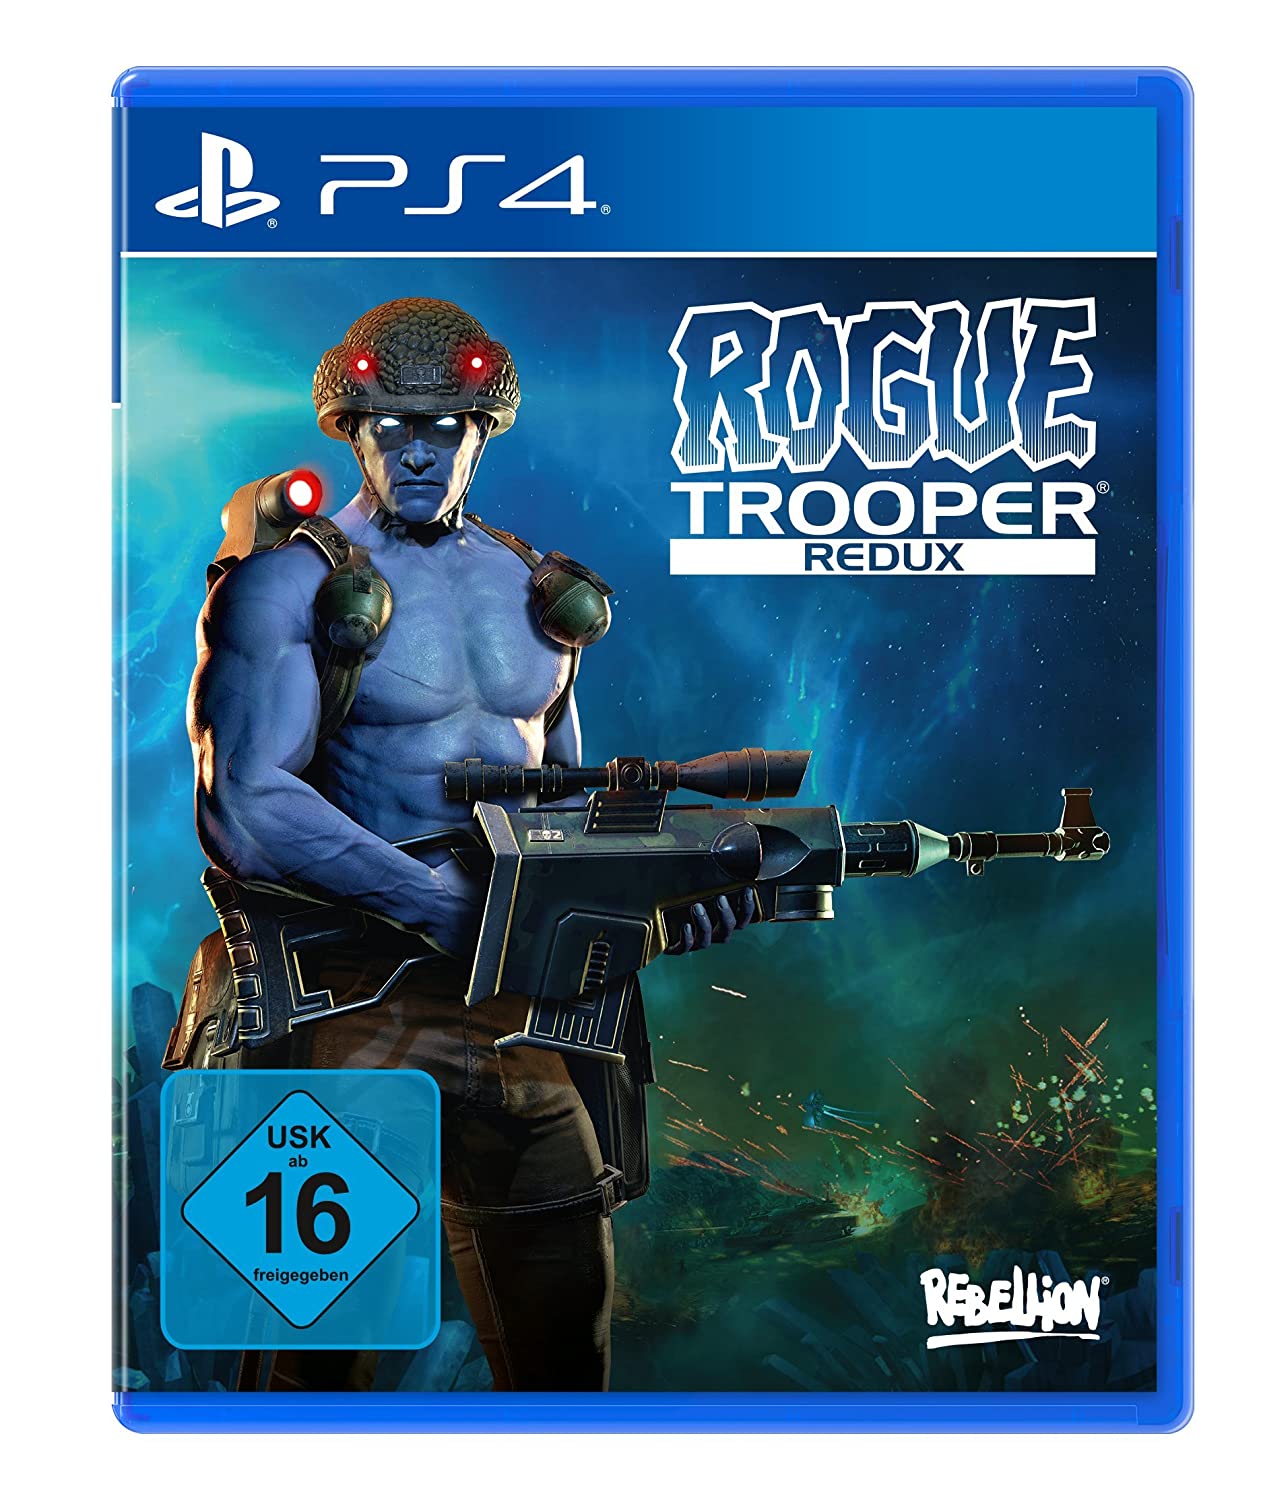 Rogue trooper redux. Rogue Trooper. Rouge Troopers Redux. Rogue Trooper Remastered.